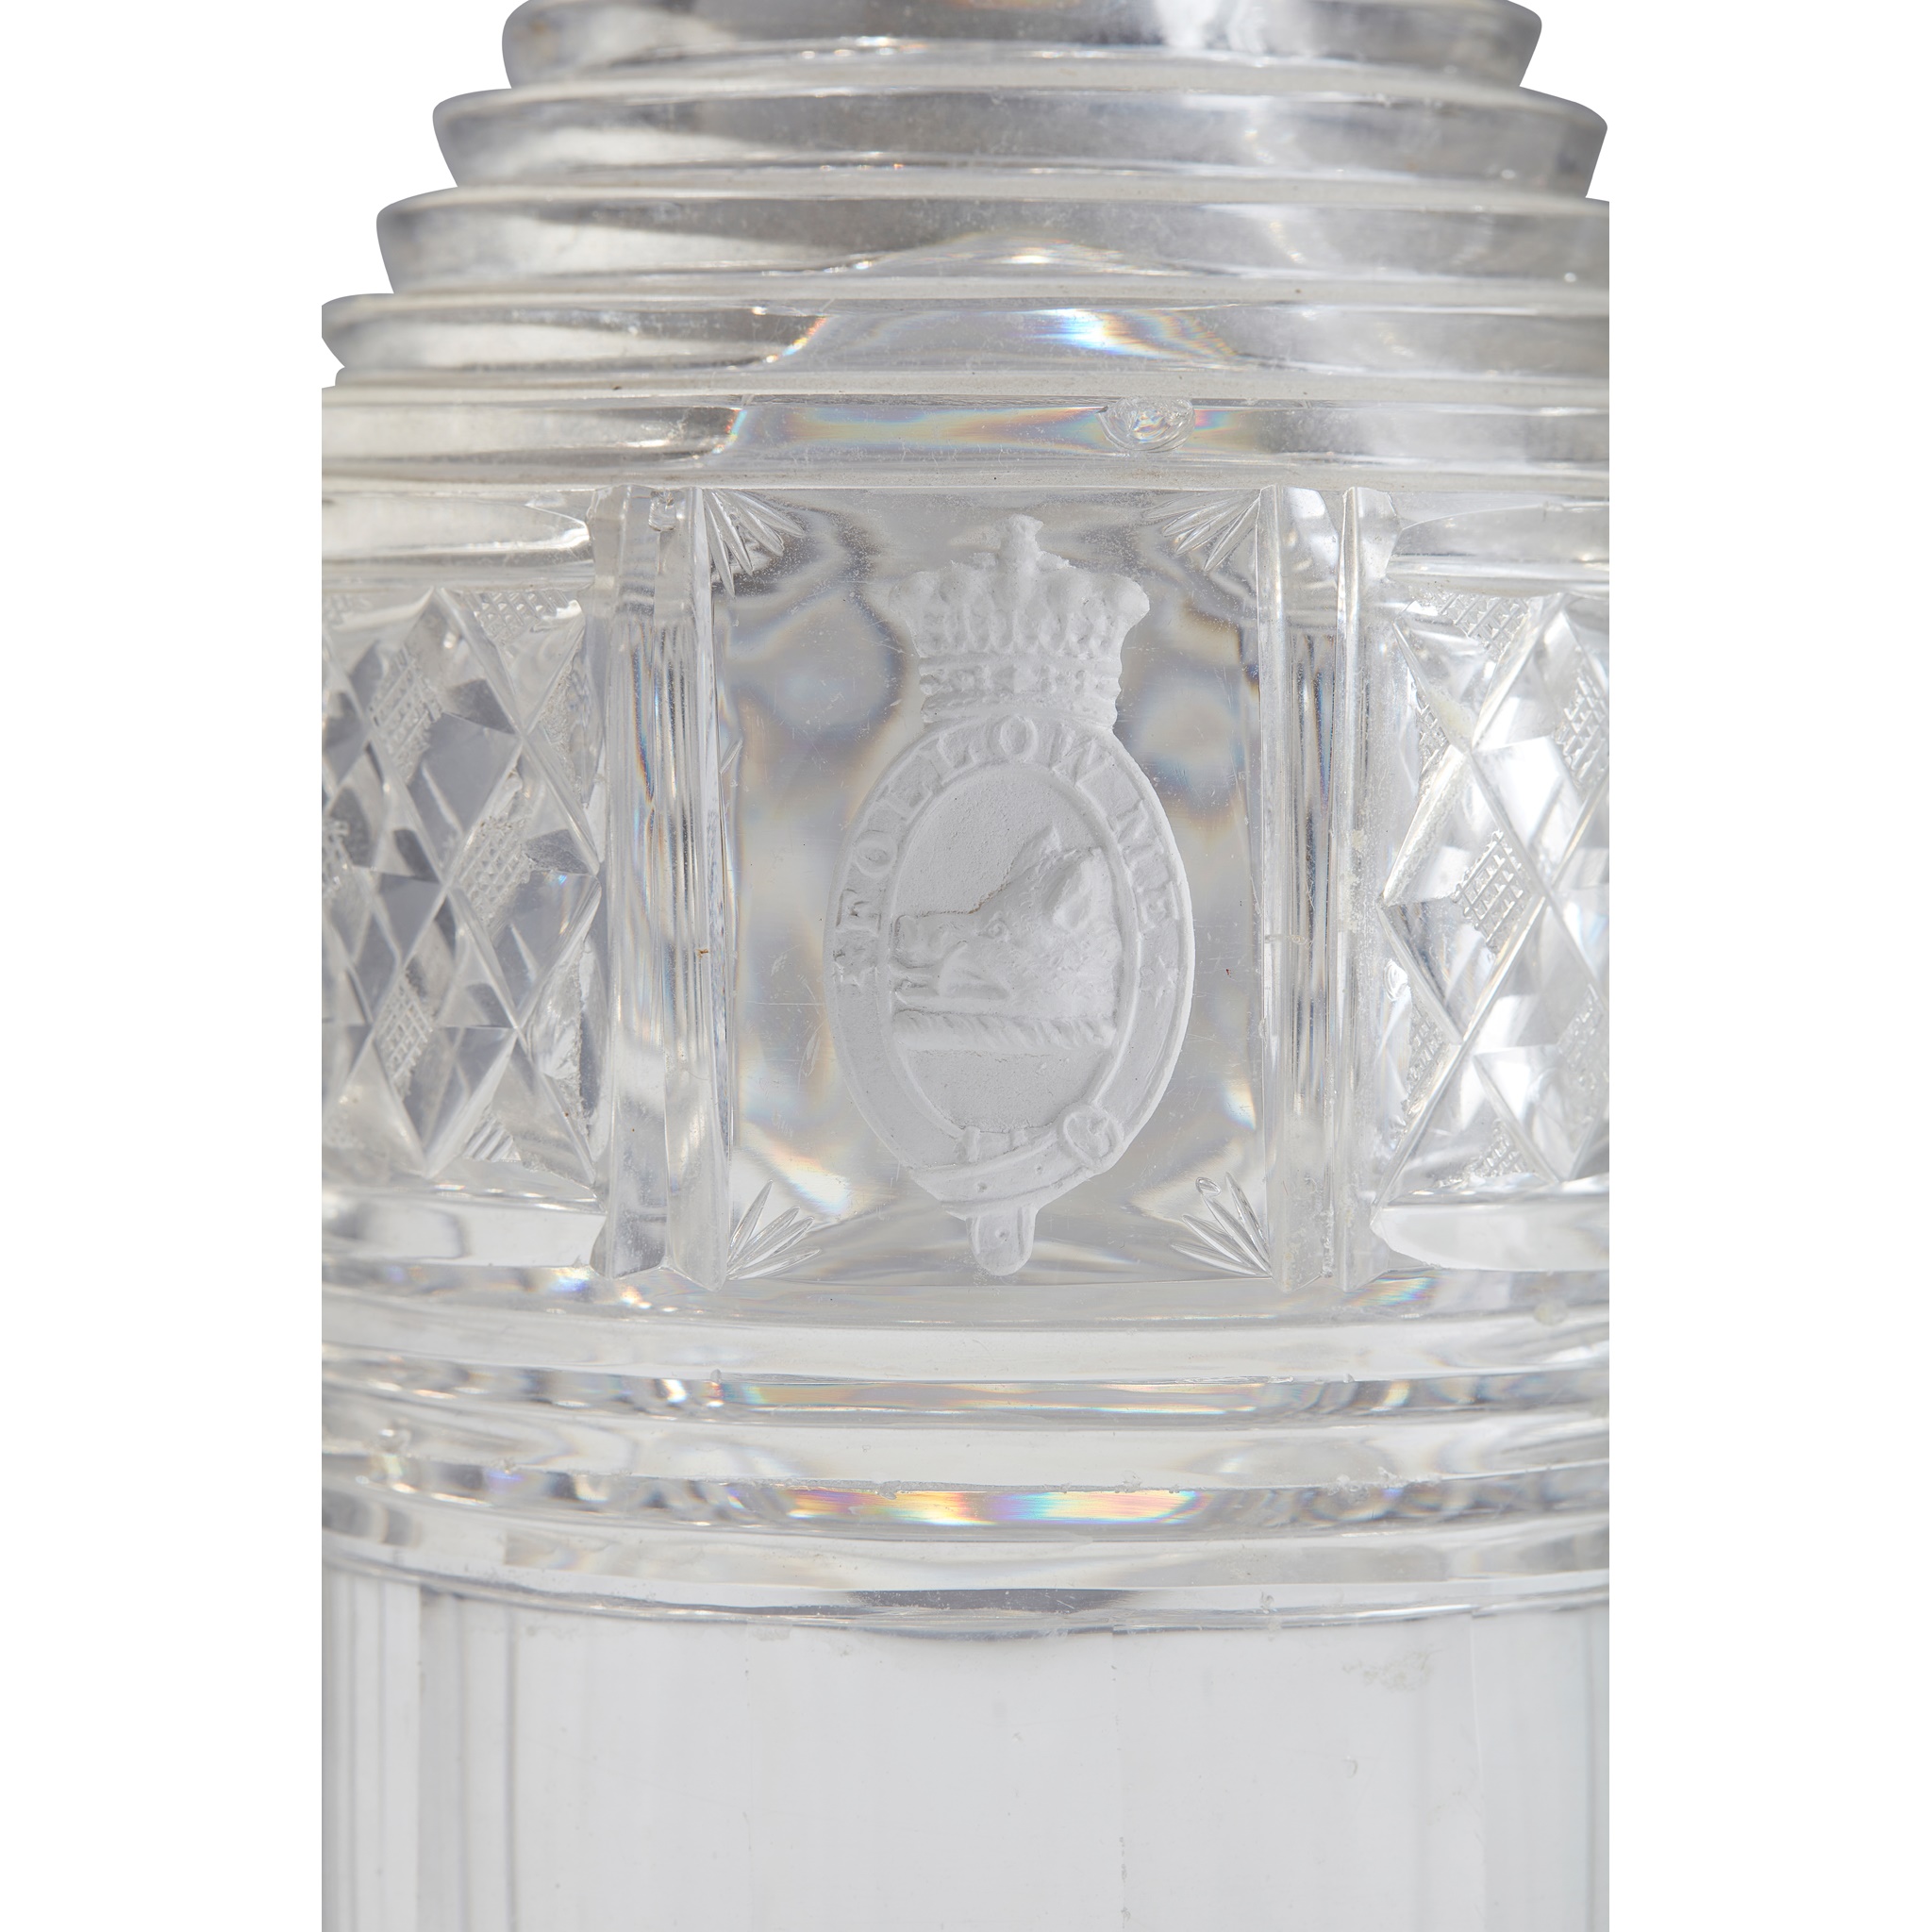 PAIR OF FULL BOTTLE DECANTERS BEARING THE BREADALBANE CREST AND MOTTO EARLY 19TH CENTURY - Image 8 of 8